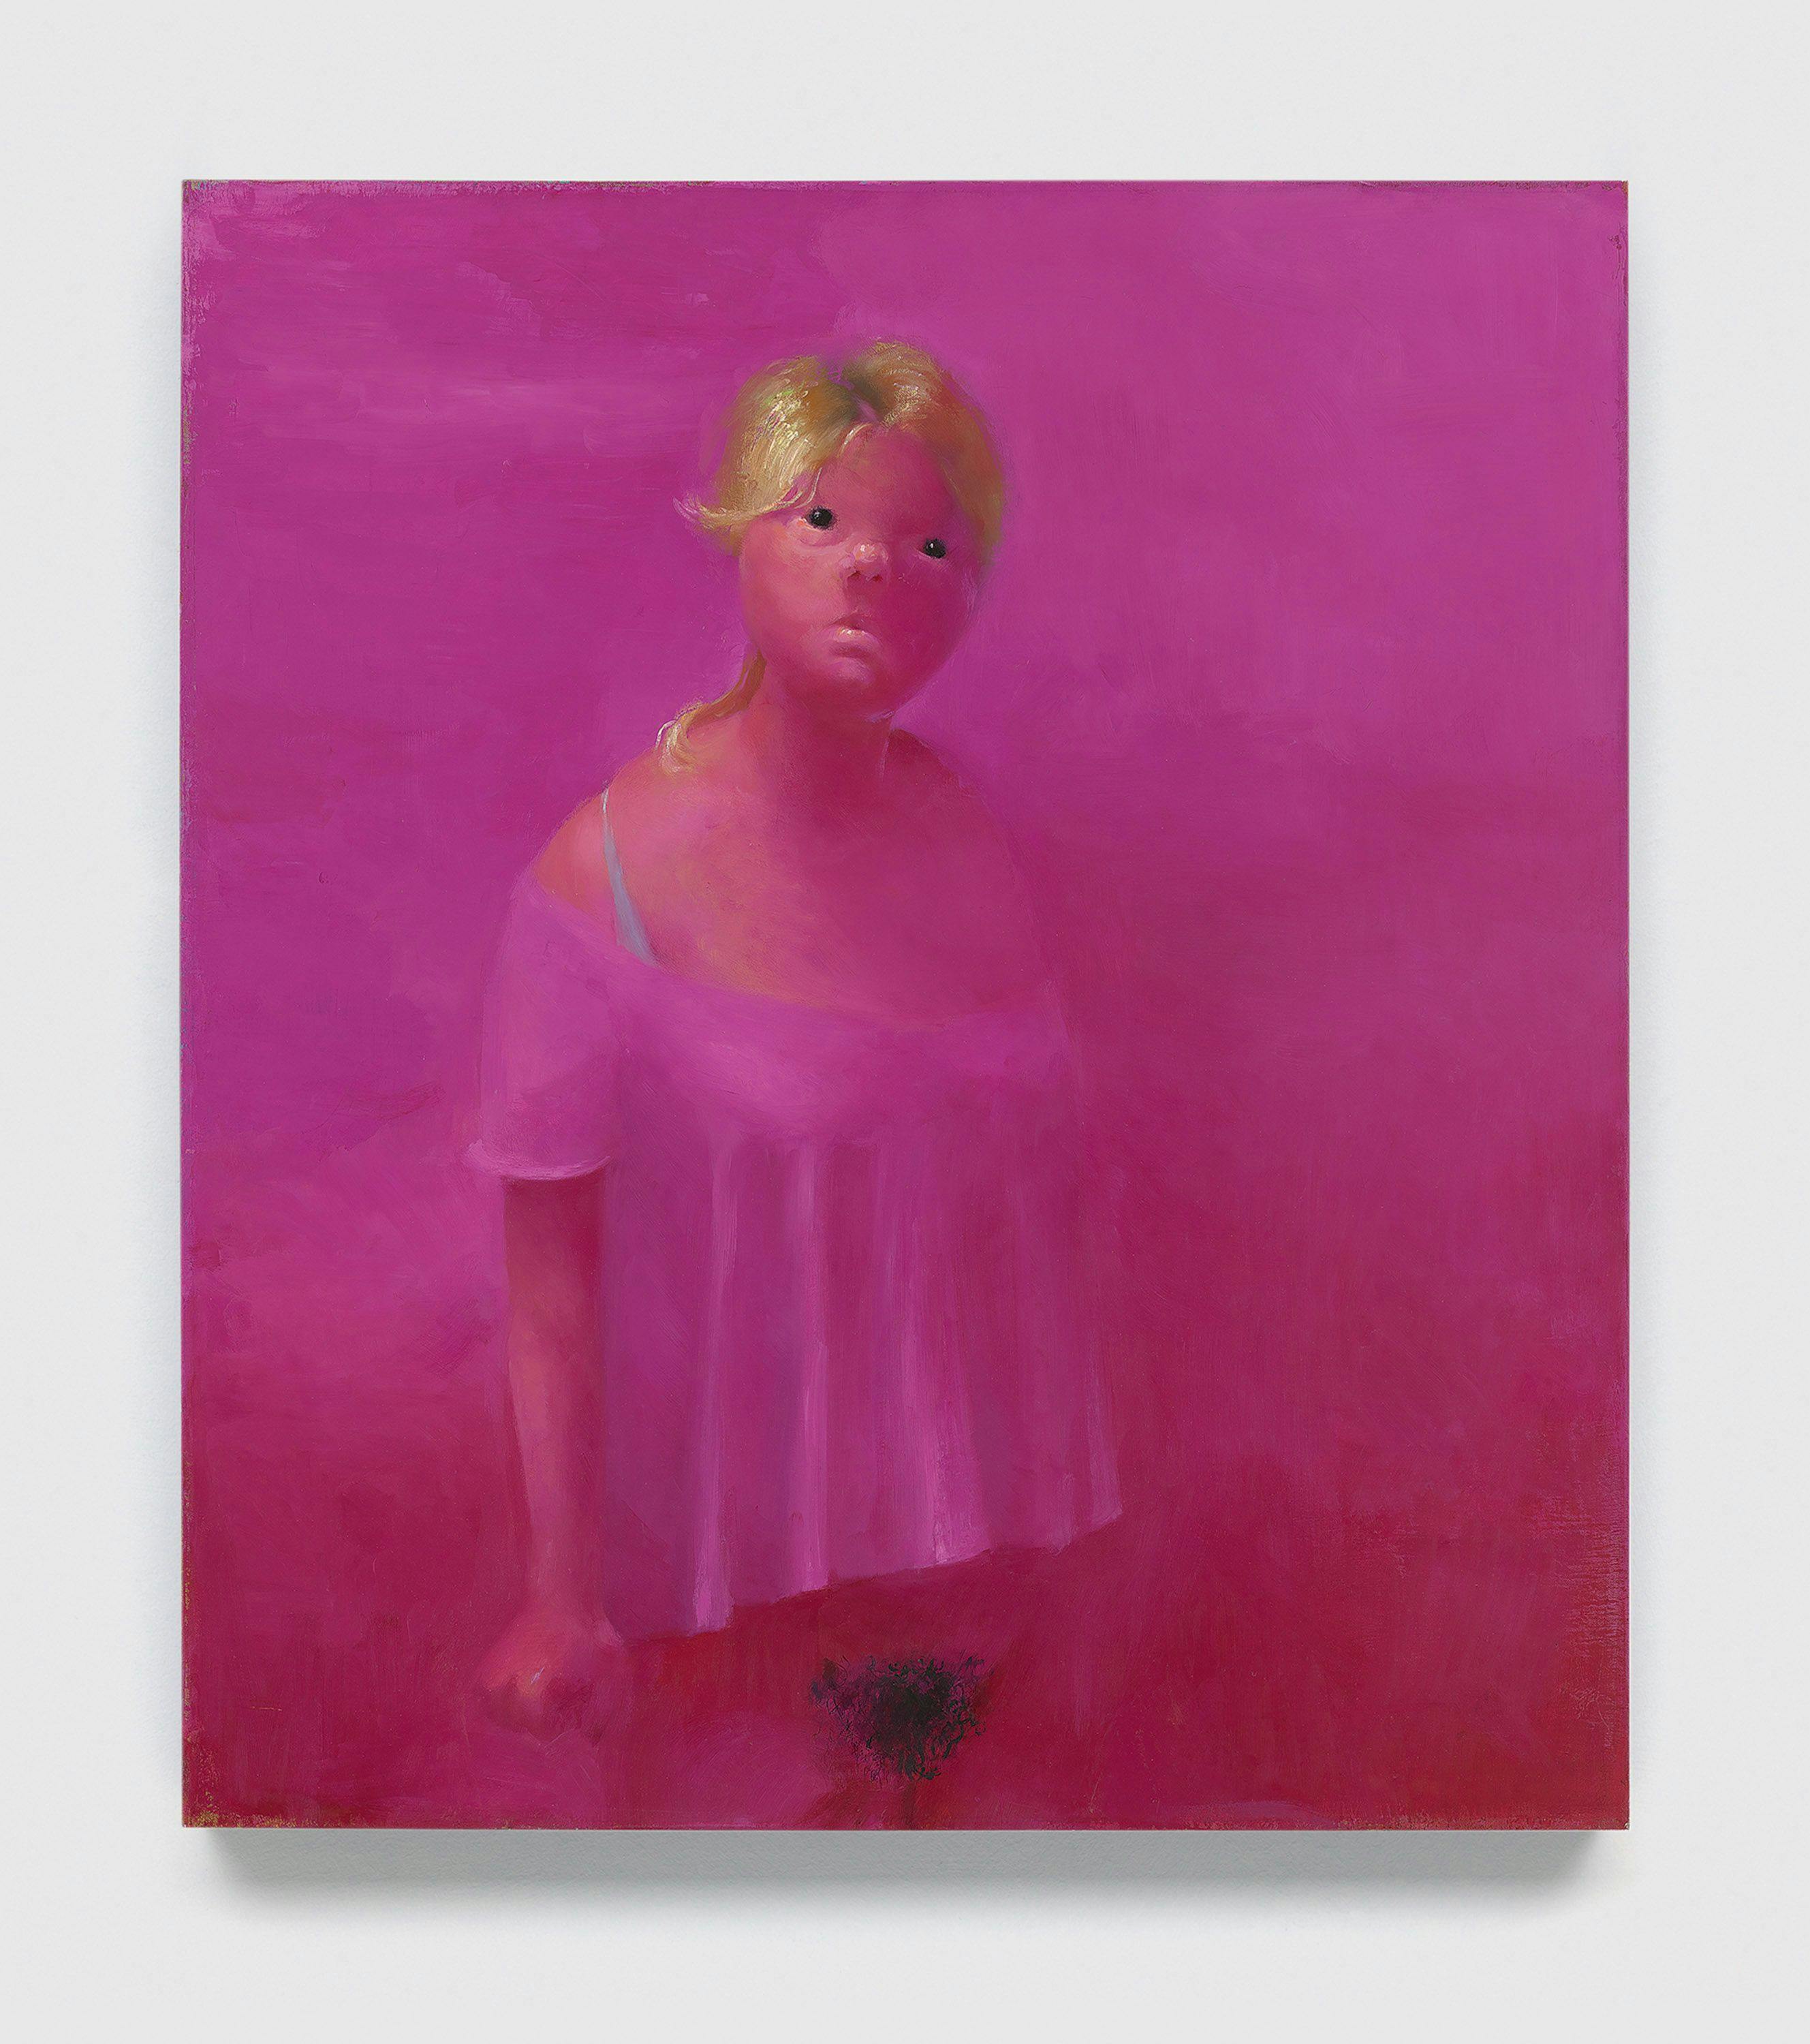 A painting by Lisa Yuskavage, titled The Ones That Don't Want To: Bad Baby, dated 1991.